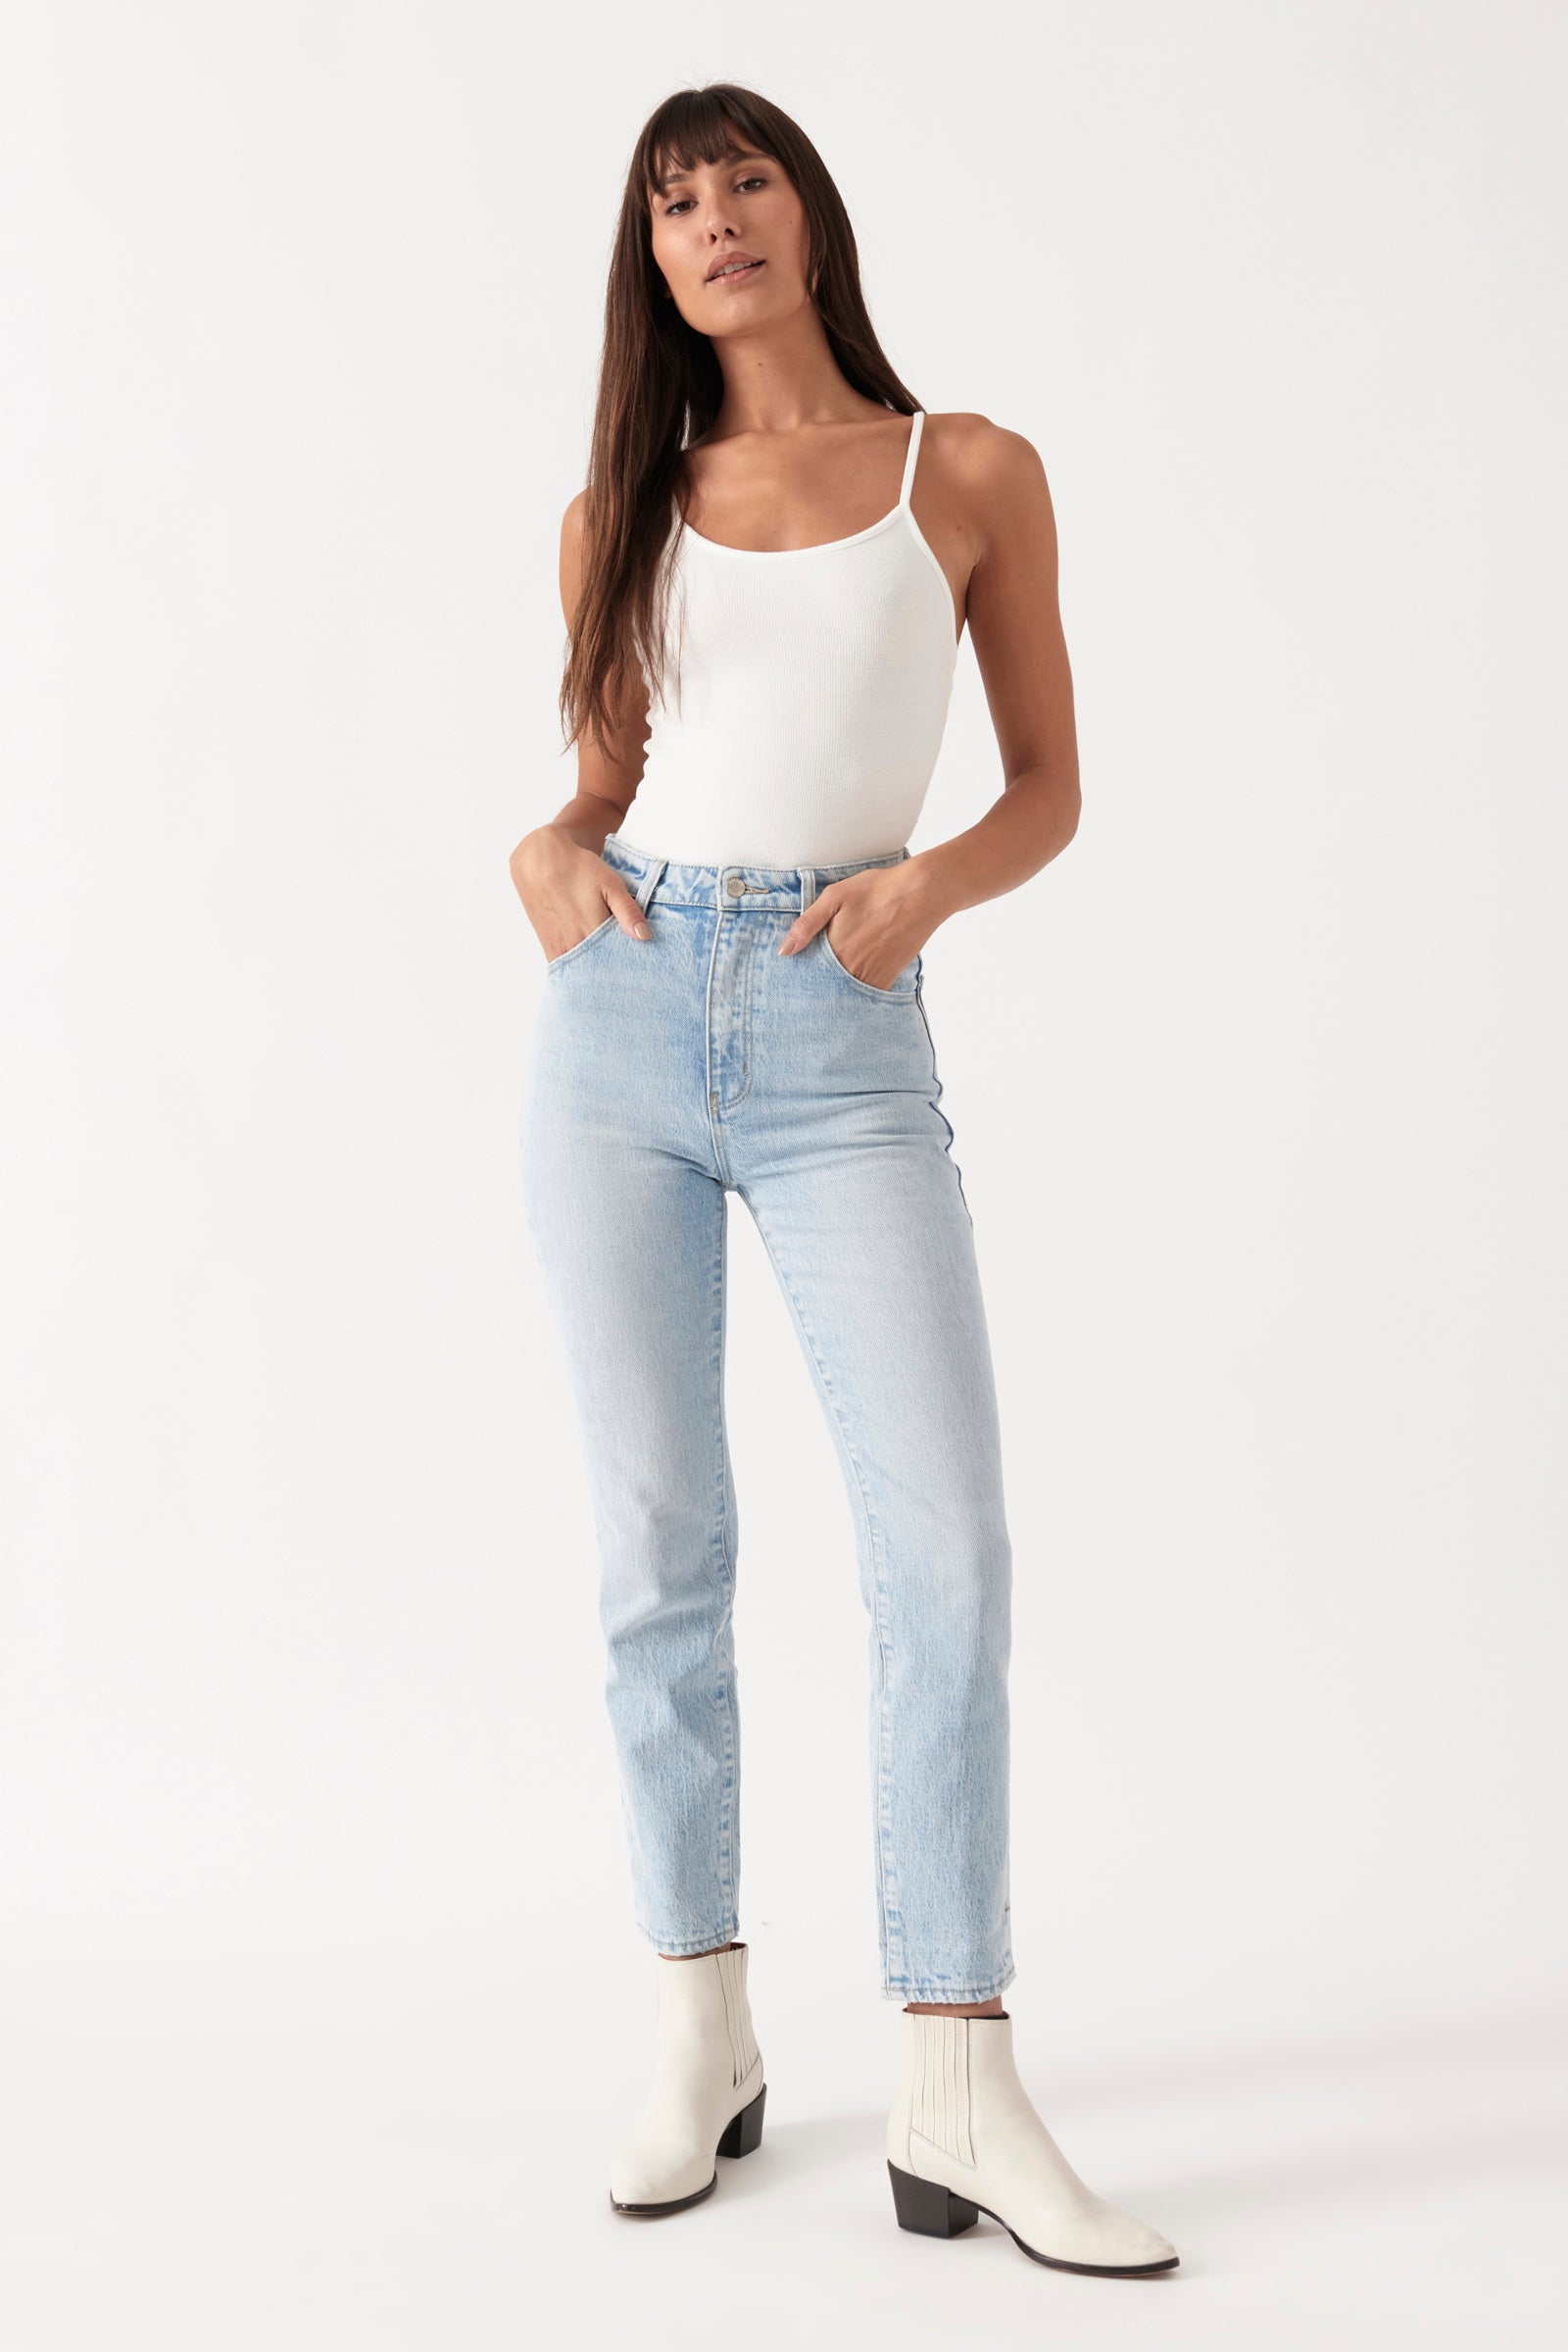 Rolla's Jeans for Women, Online Sale up to 45% off